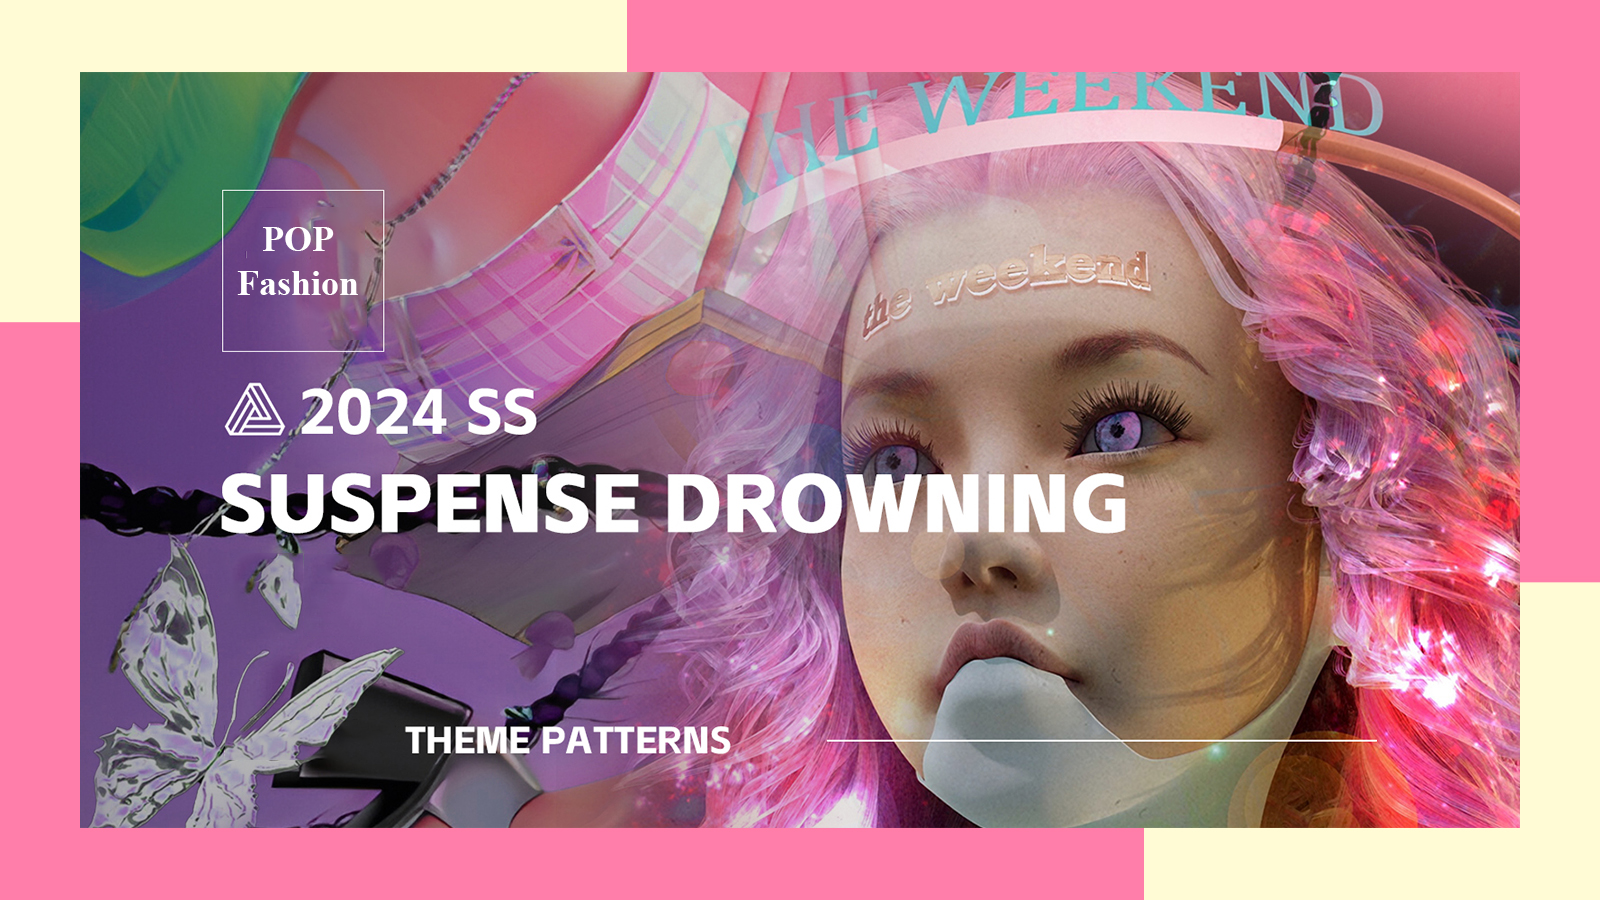 Suspense Drowning -- The Spring/Summer 2024 Pattern Trend